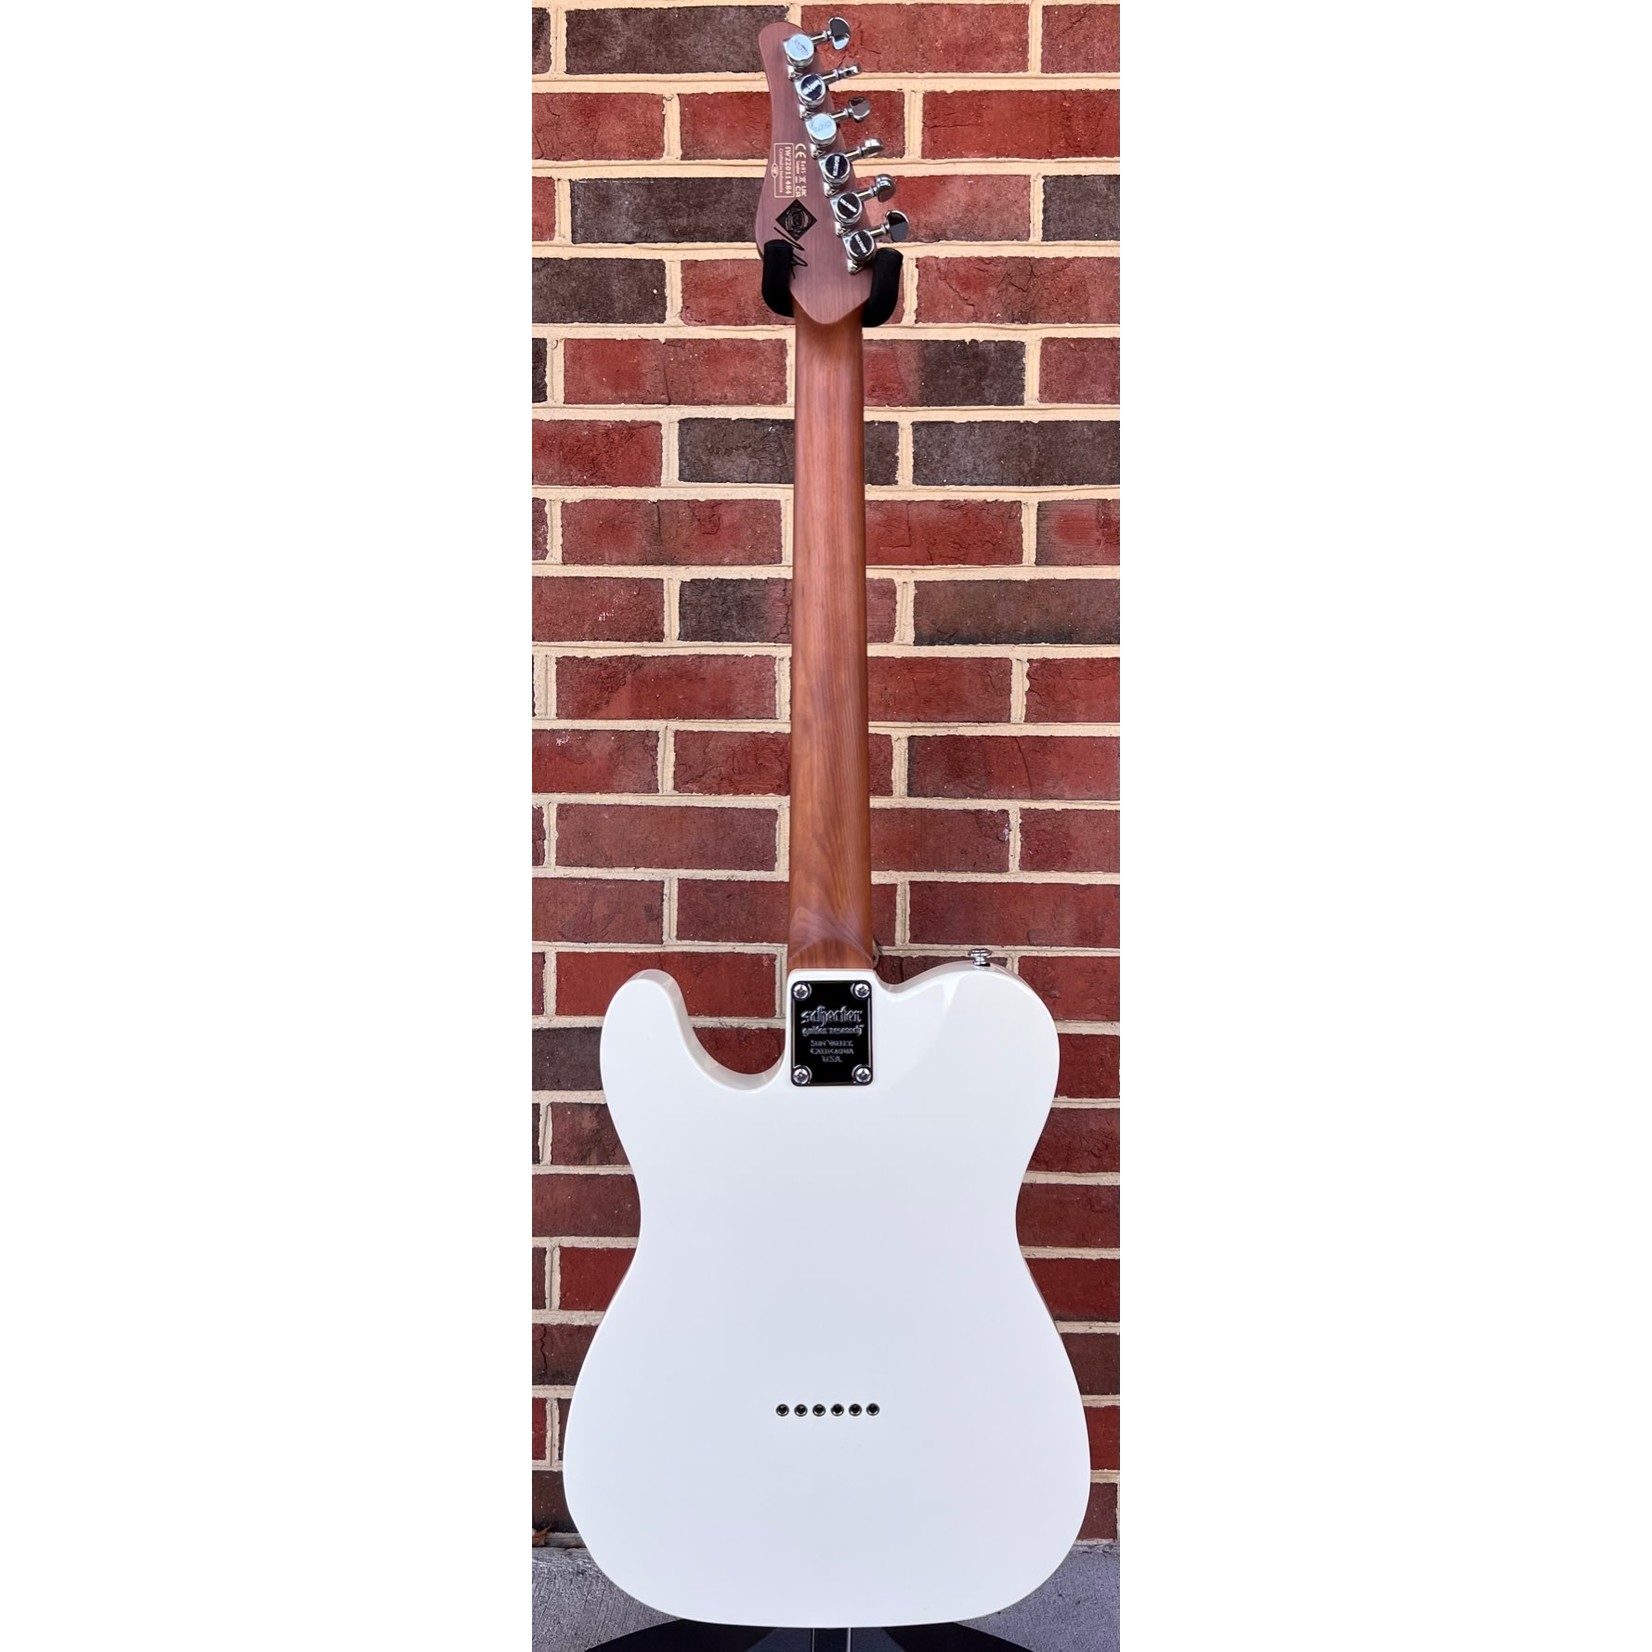 Schecter Guitar Research Schecter Nick Johnston PT, Atomic Snow, Roasted Maple Neck, Ebony Fretboard, Locking Tuners